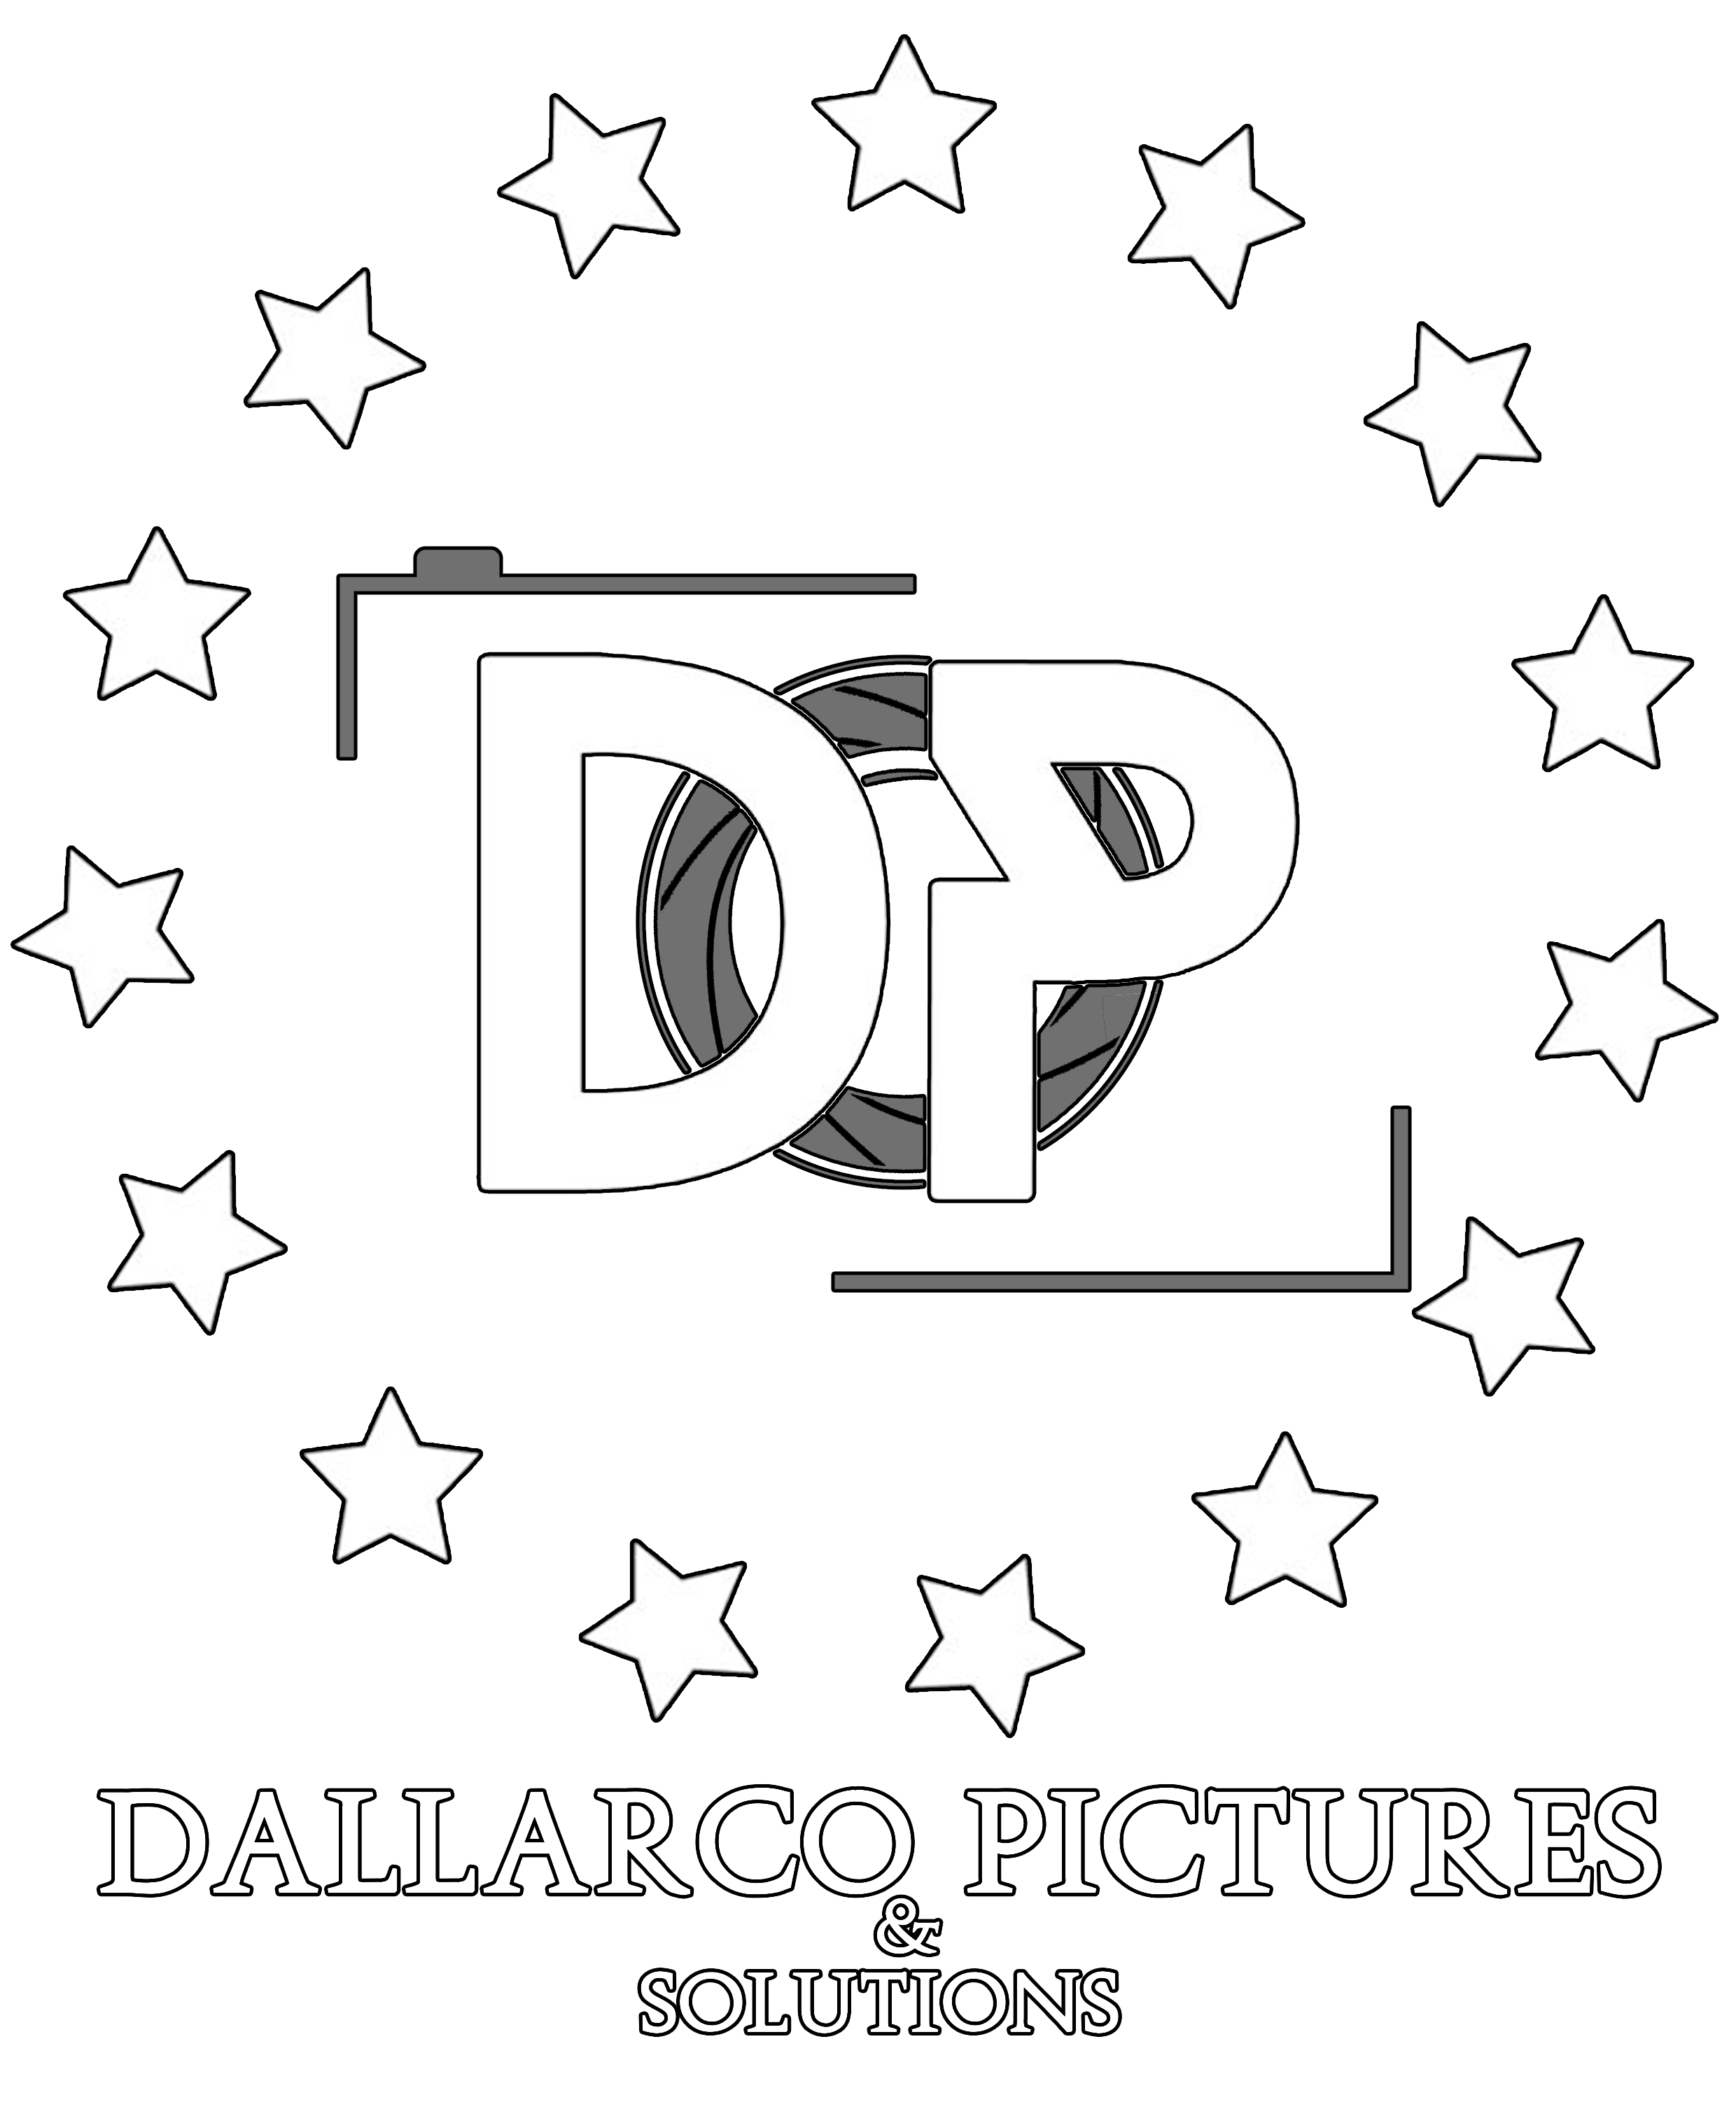 Dallarco Pictures & Solutions